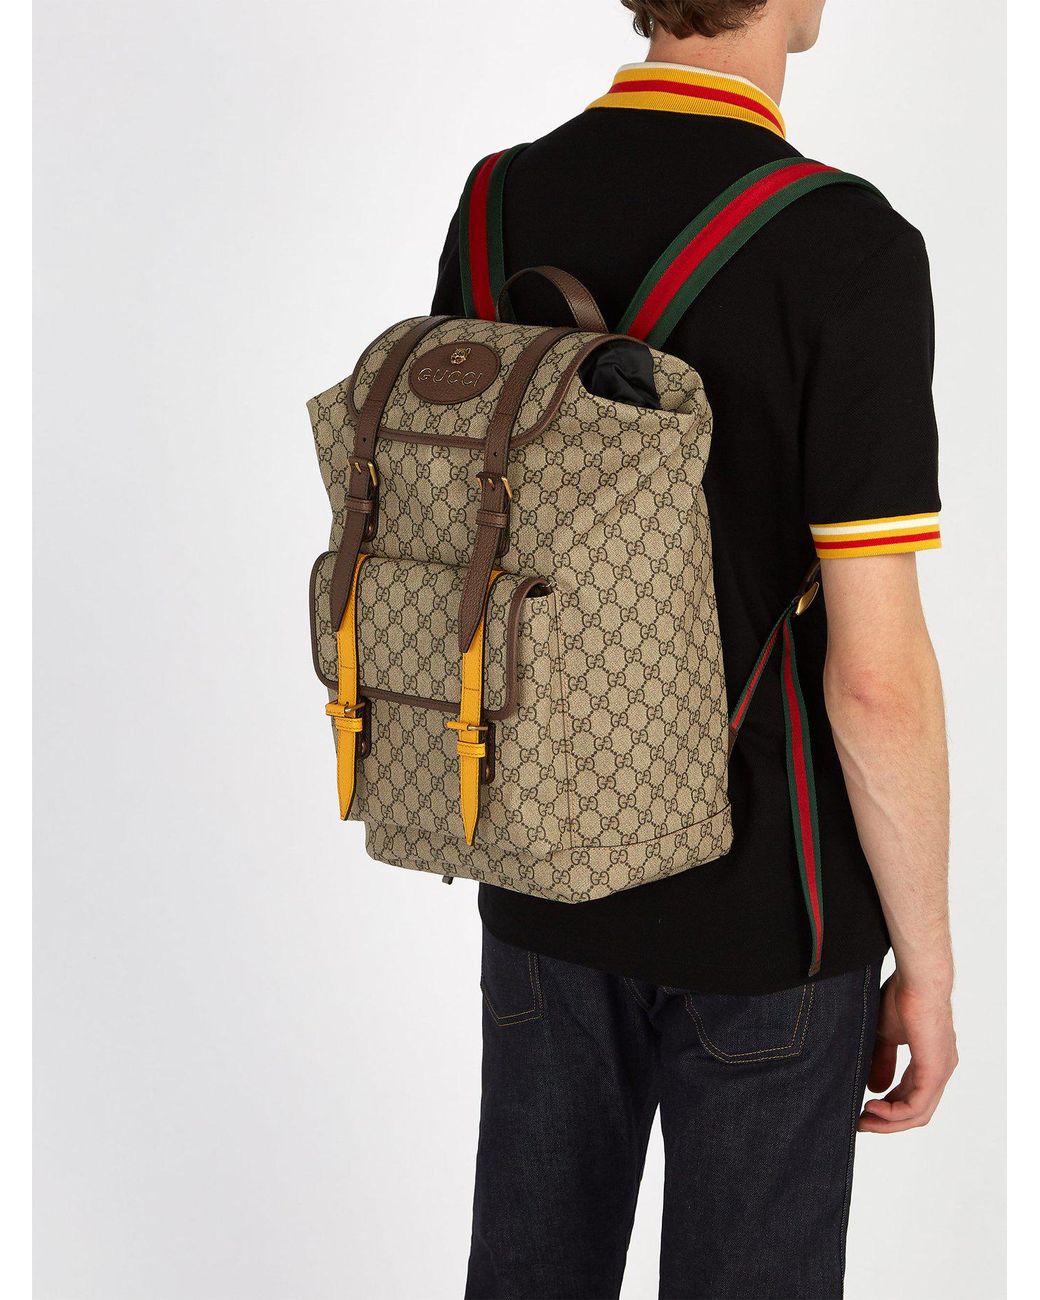 Gucci - Logo-Appliquéd Leather-Trimmed Printed Monogrammed Coated-Canvas  Backpack - Brown Gucci